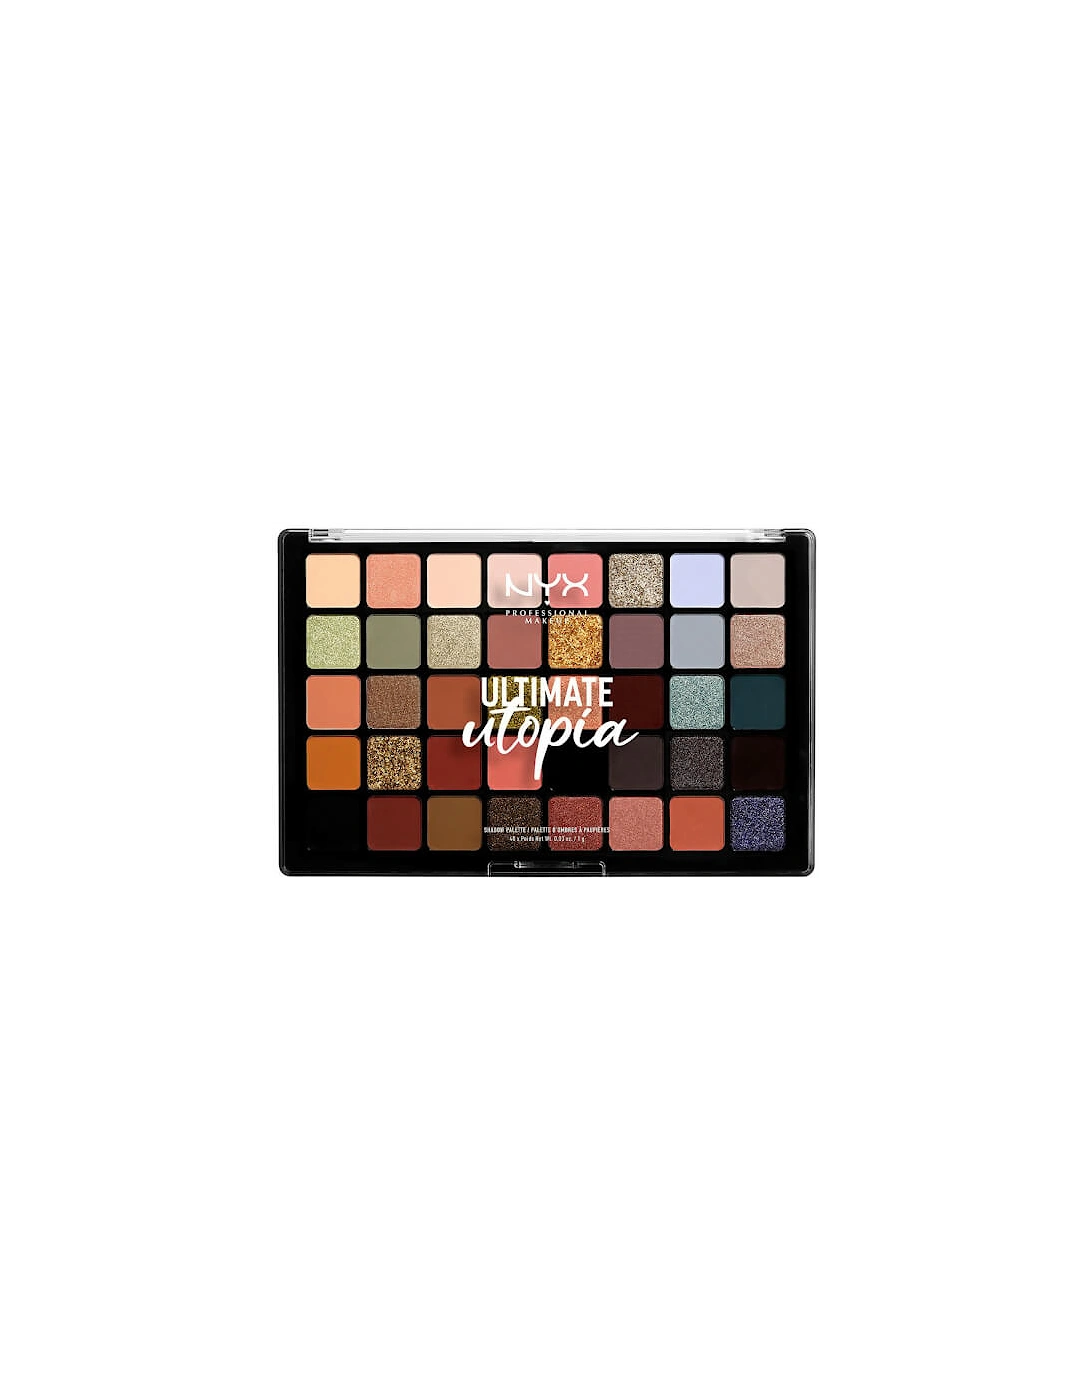 Ultimate Shadow Utopia Palette - 40 Shades 10g, 2 of 1